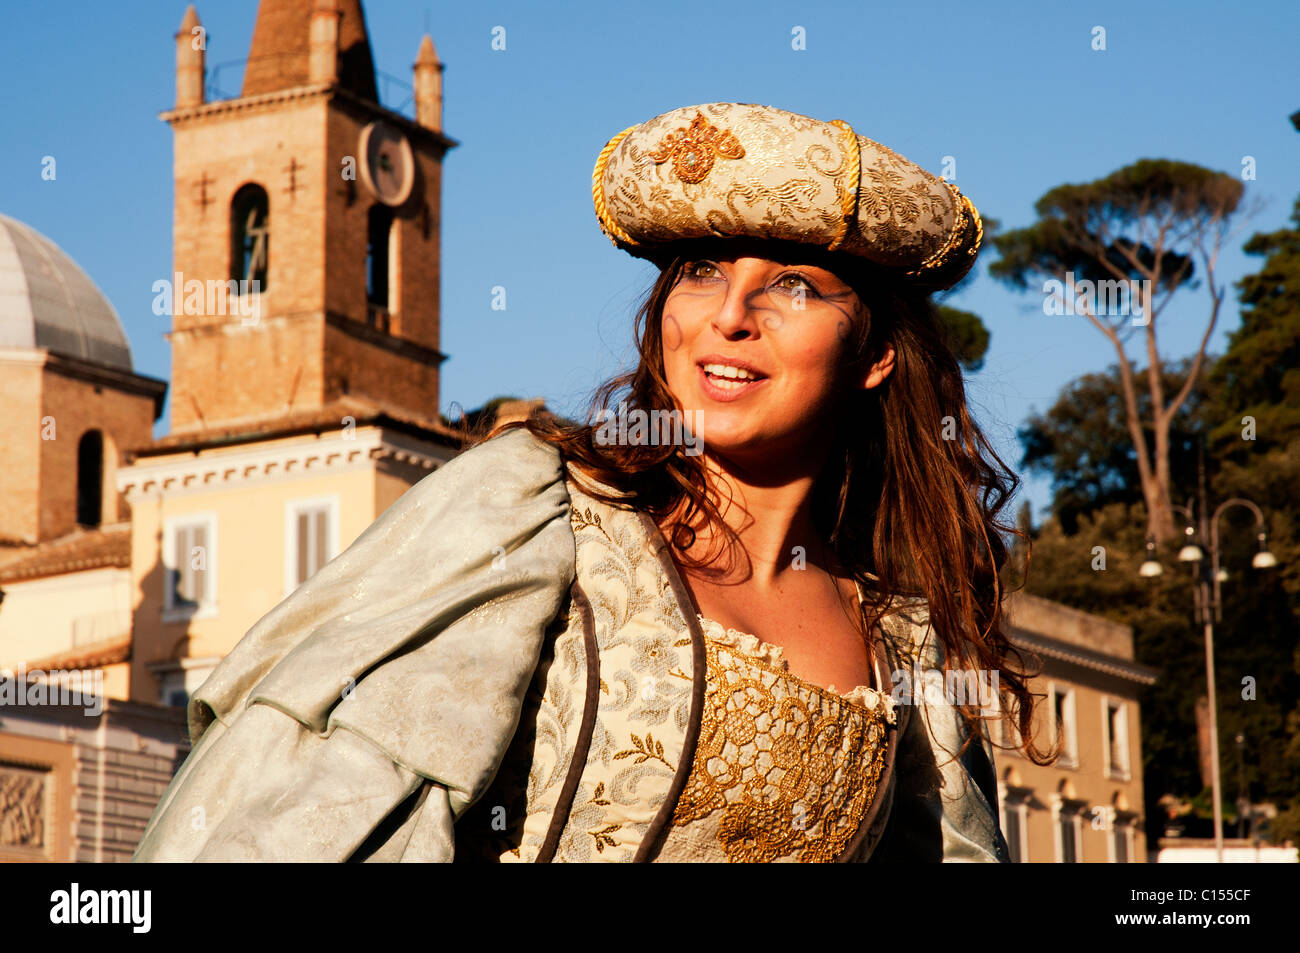 A woman in a medieval costume at the "Carnevale Romano 2011" in Piazza del Popolo, Rome Italy Stock Photo